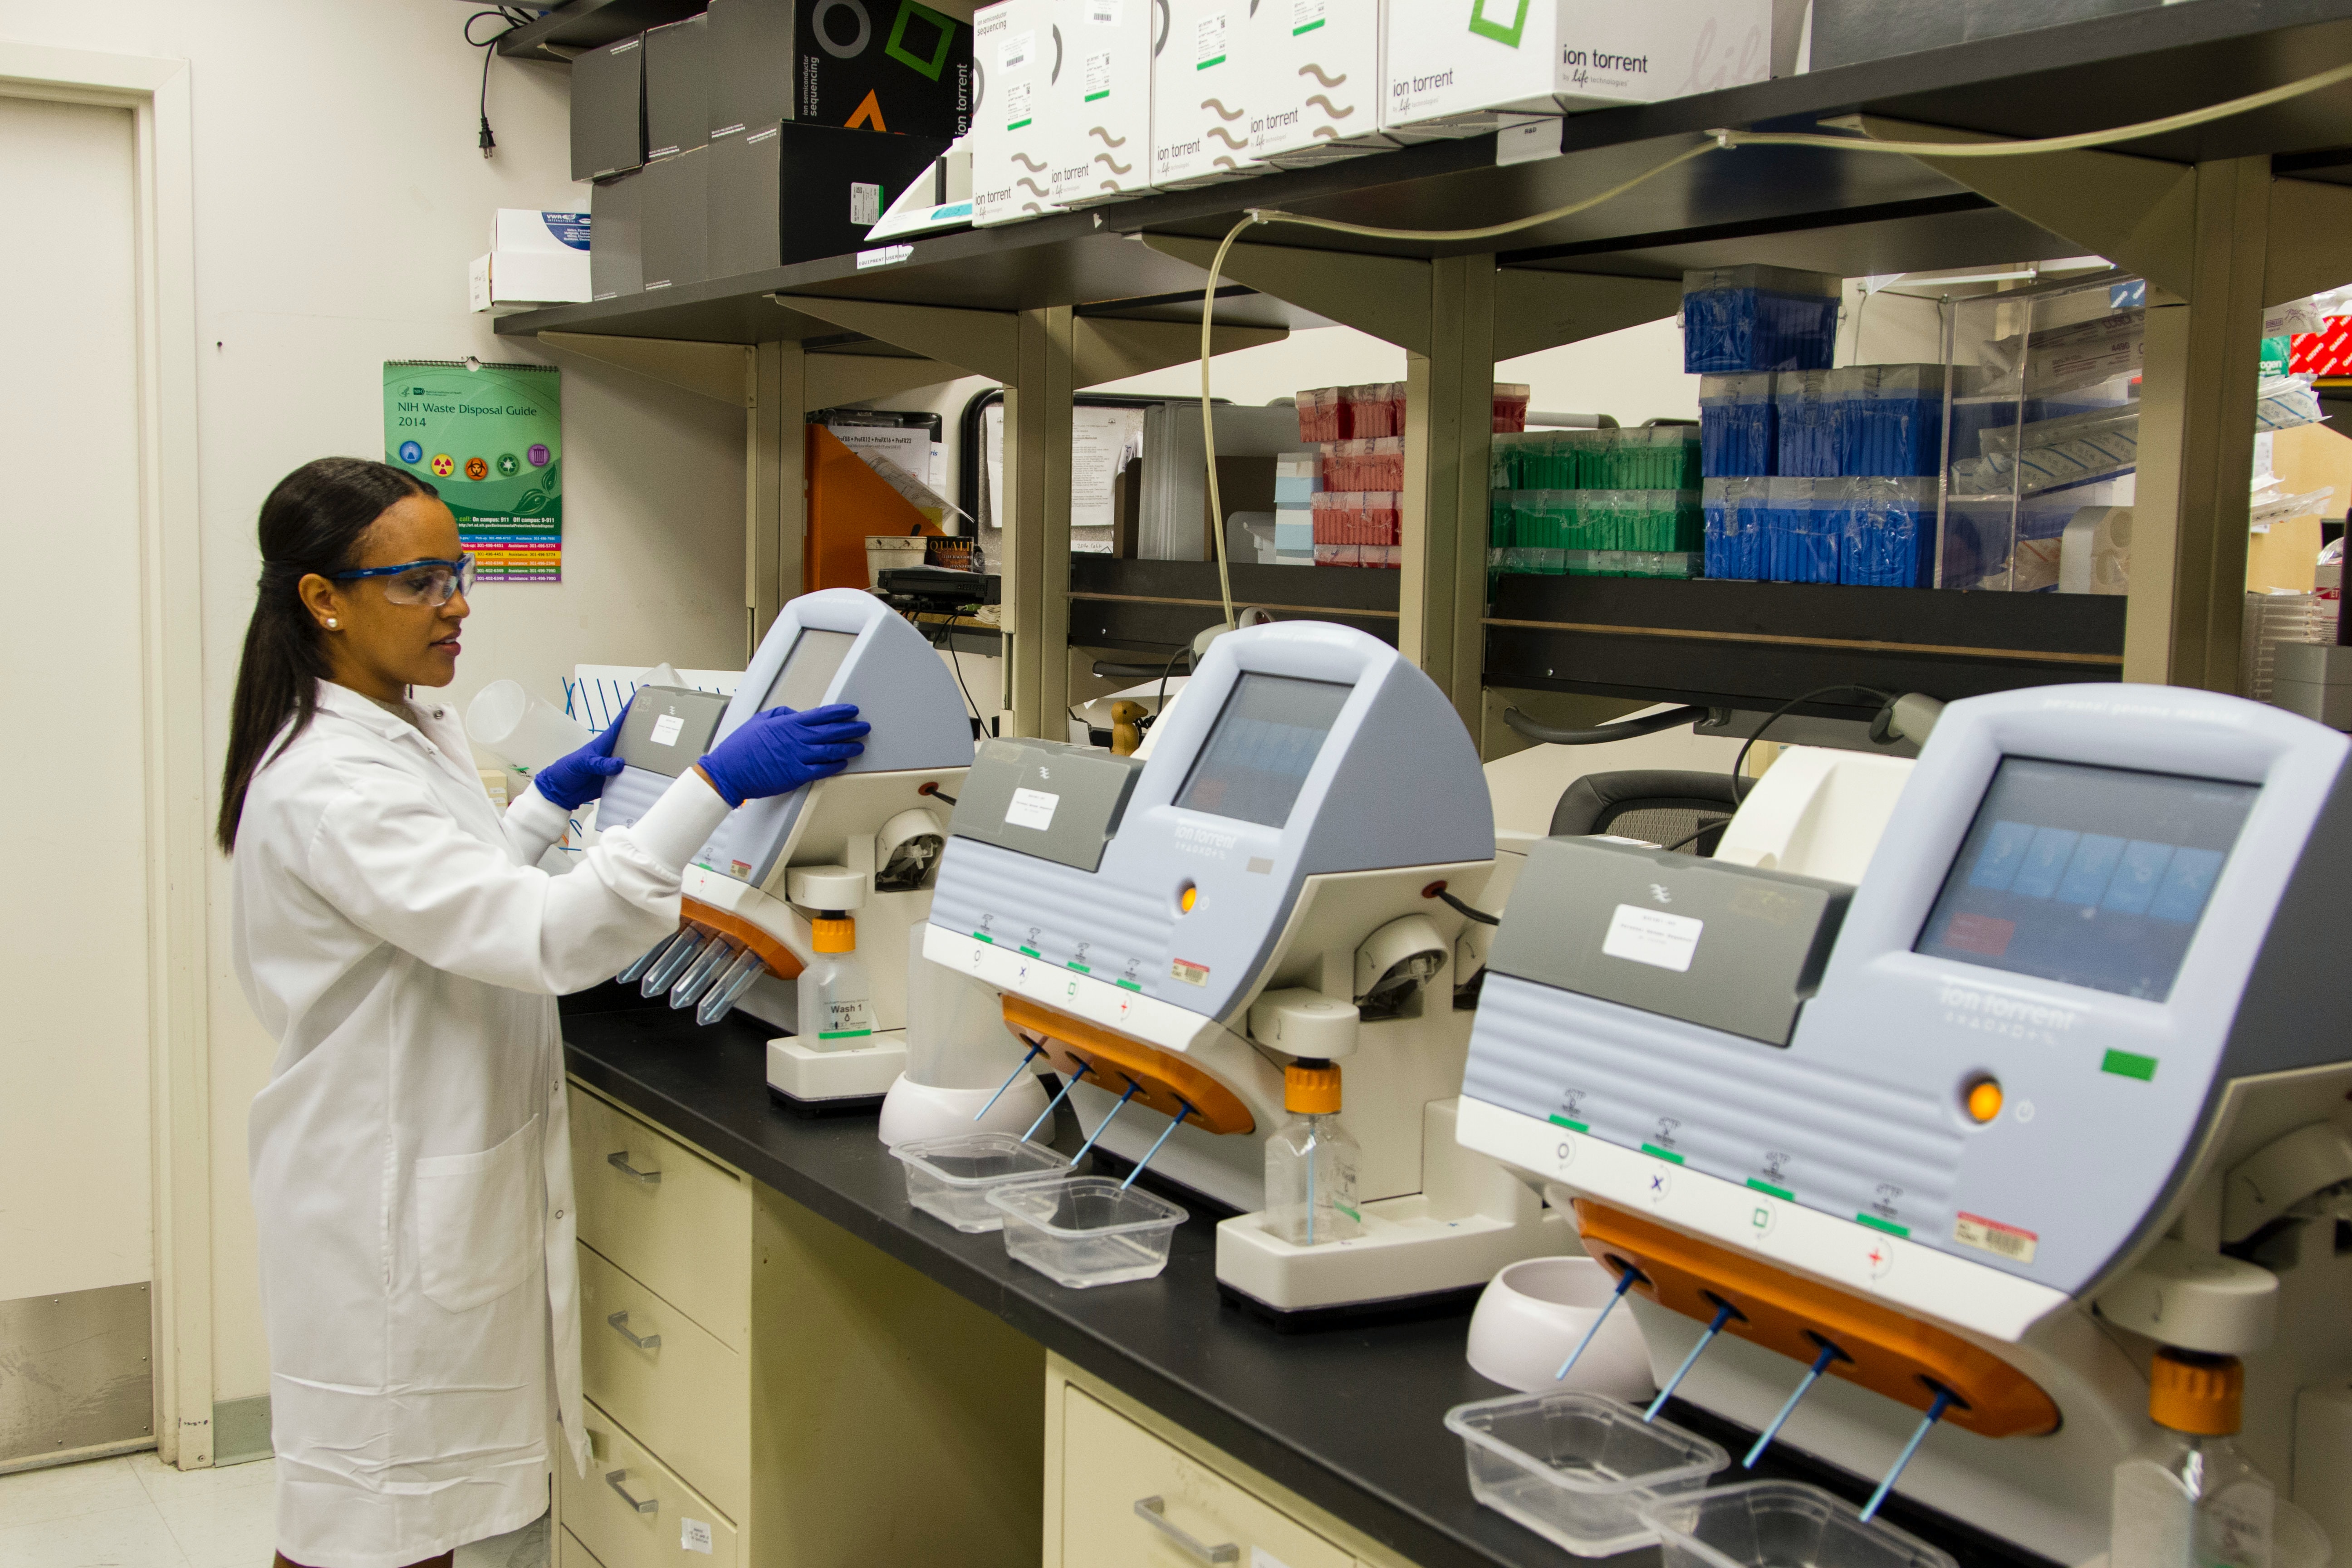 A technician validates genetic variants identified through whole-exome sequencing at the Cancer Genomics Research Laboratory, part of the National Cancer Institute's Division of Cancer Epidemiology and Genetics (DCEG).